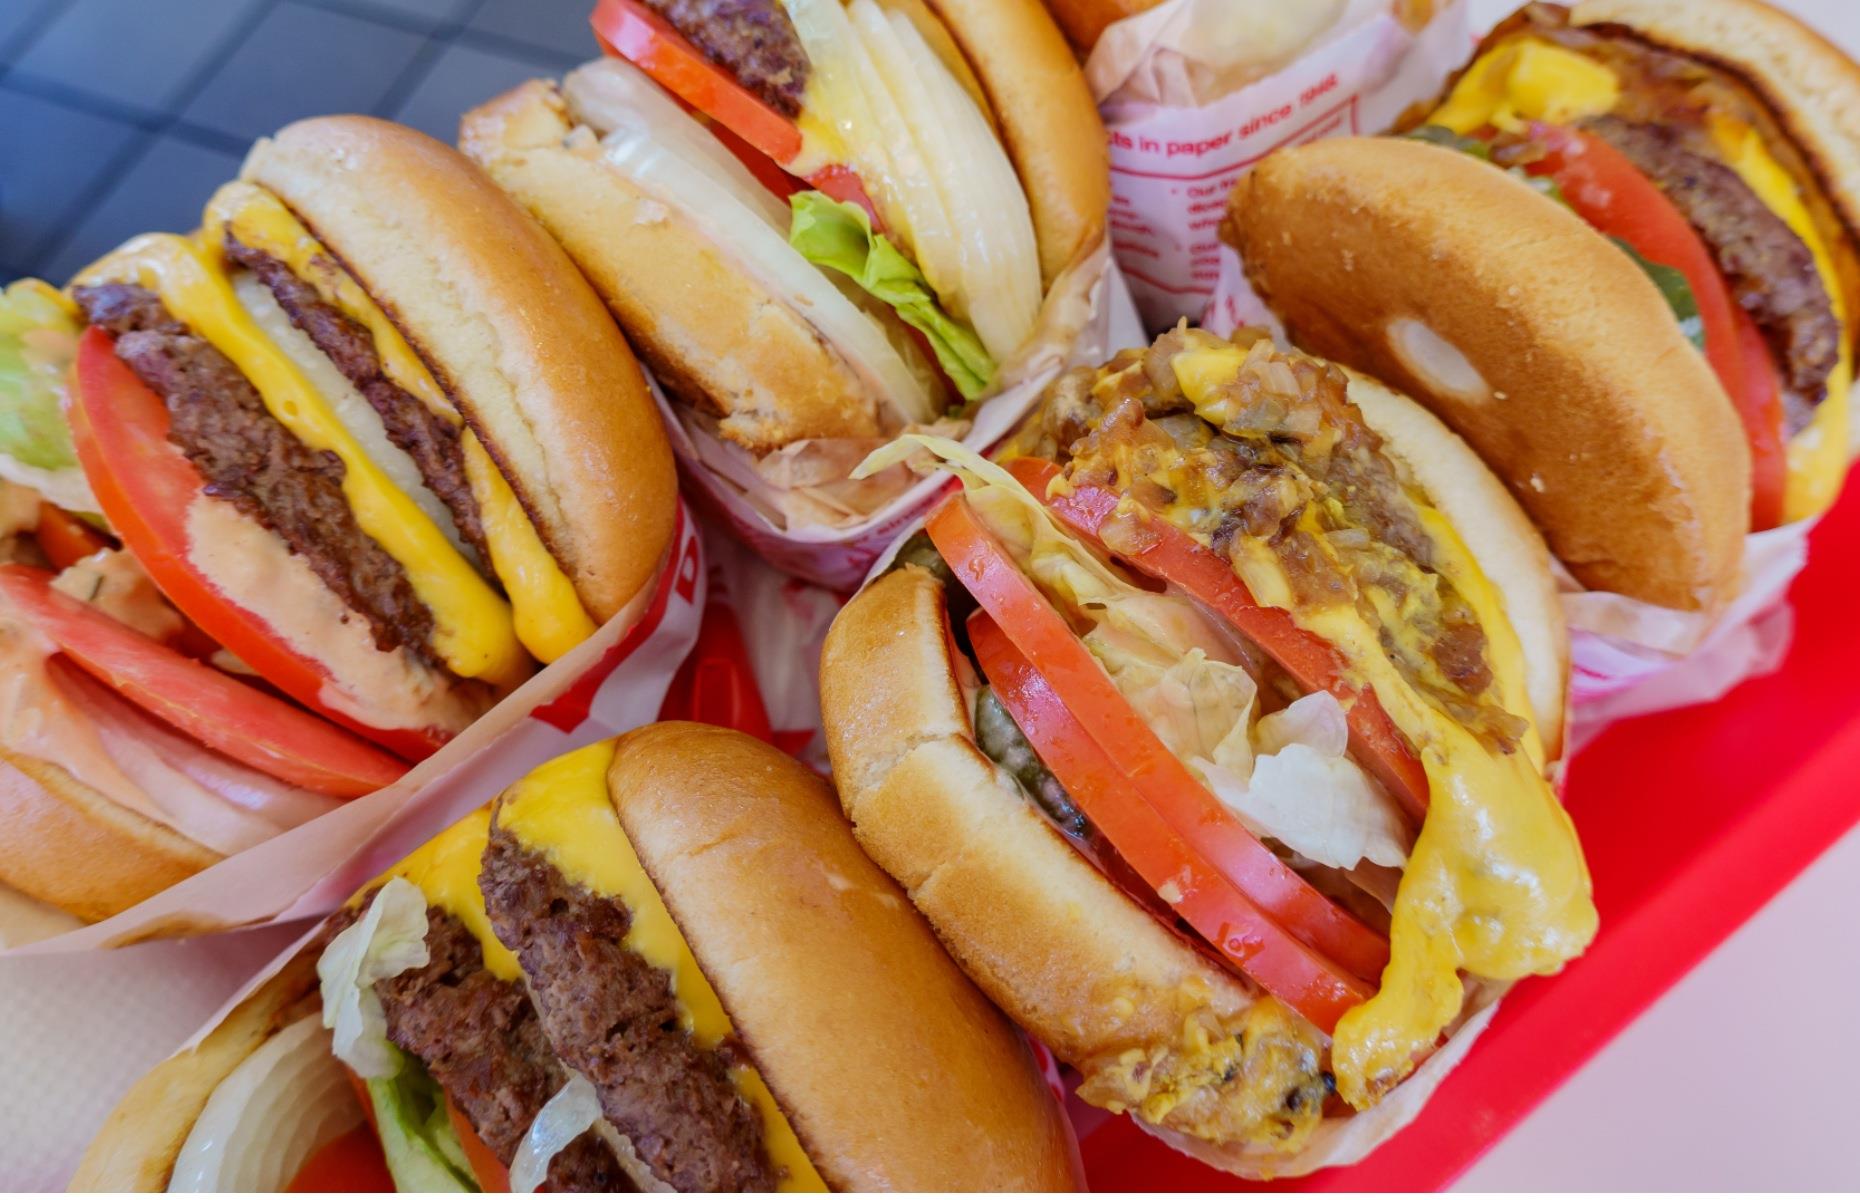 <p>Now the Duke and Duchess of Sussex live in the US, Harry has embraced one of the country's most popular burger chains, In-N-Out – and they even know his order! Speaking to <em>Variety</em>, Meghan revealed: "My husband’s favorite is In-N-Out. There’s one at the halfway point between LA and our neck of the woods. It’s really fun to go through the drive-thru and surprise them. They know our order."</p>